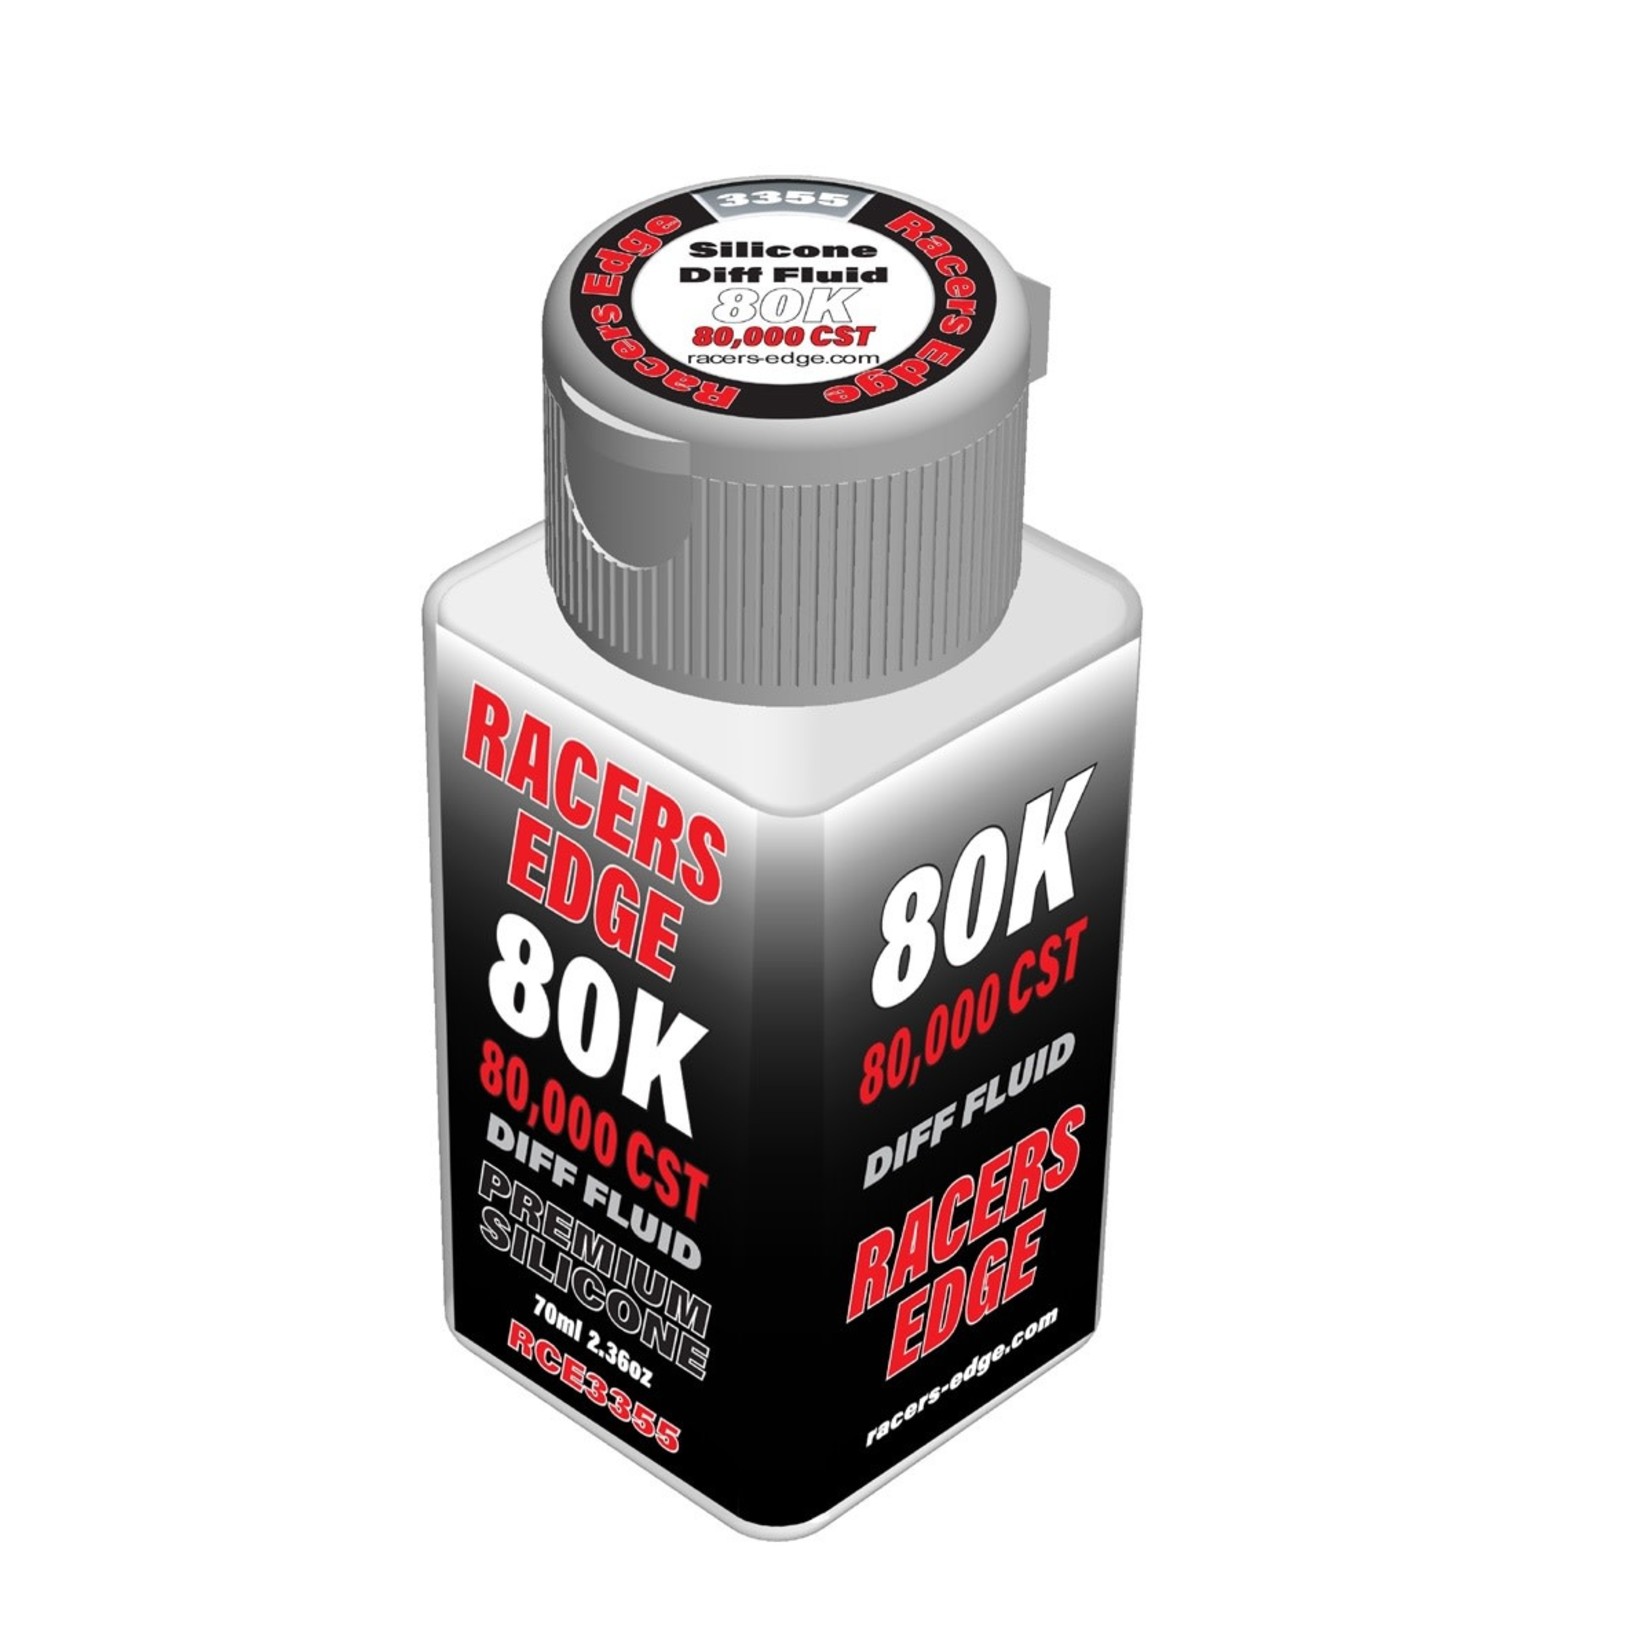 Racers Edge RCE3355 Racers Edge Pure Silicone Diff Fluid 80,000cst 70ml 2.36oz